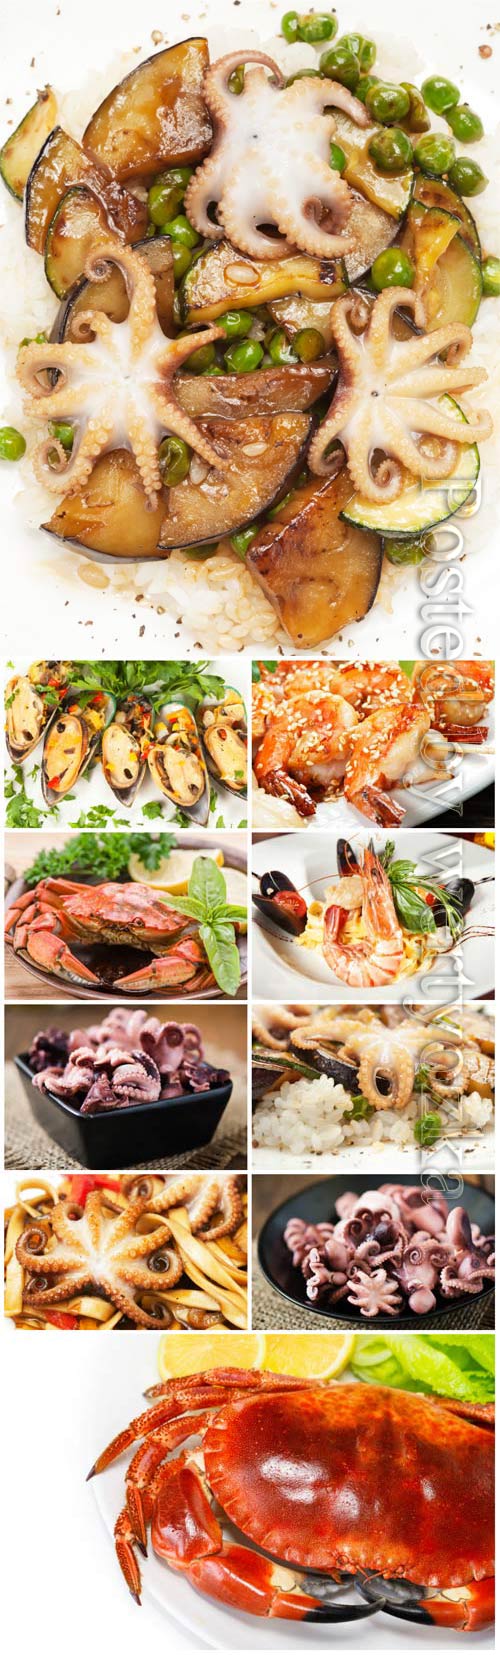 Crabs, mussels and shrimps stock photo